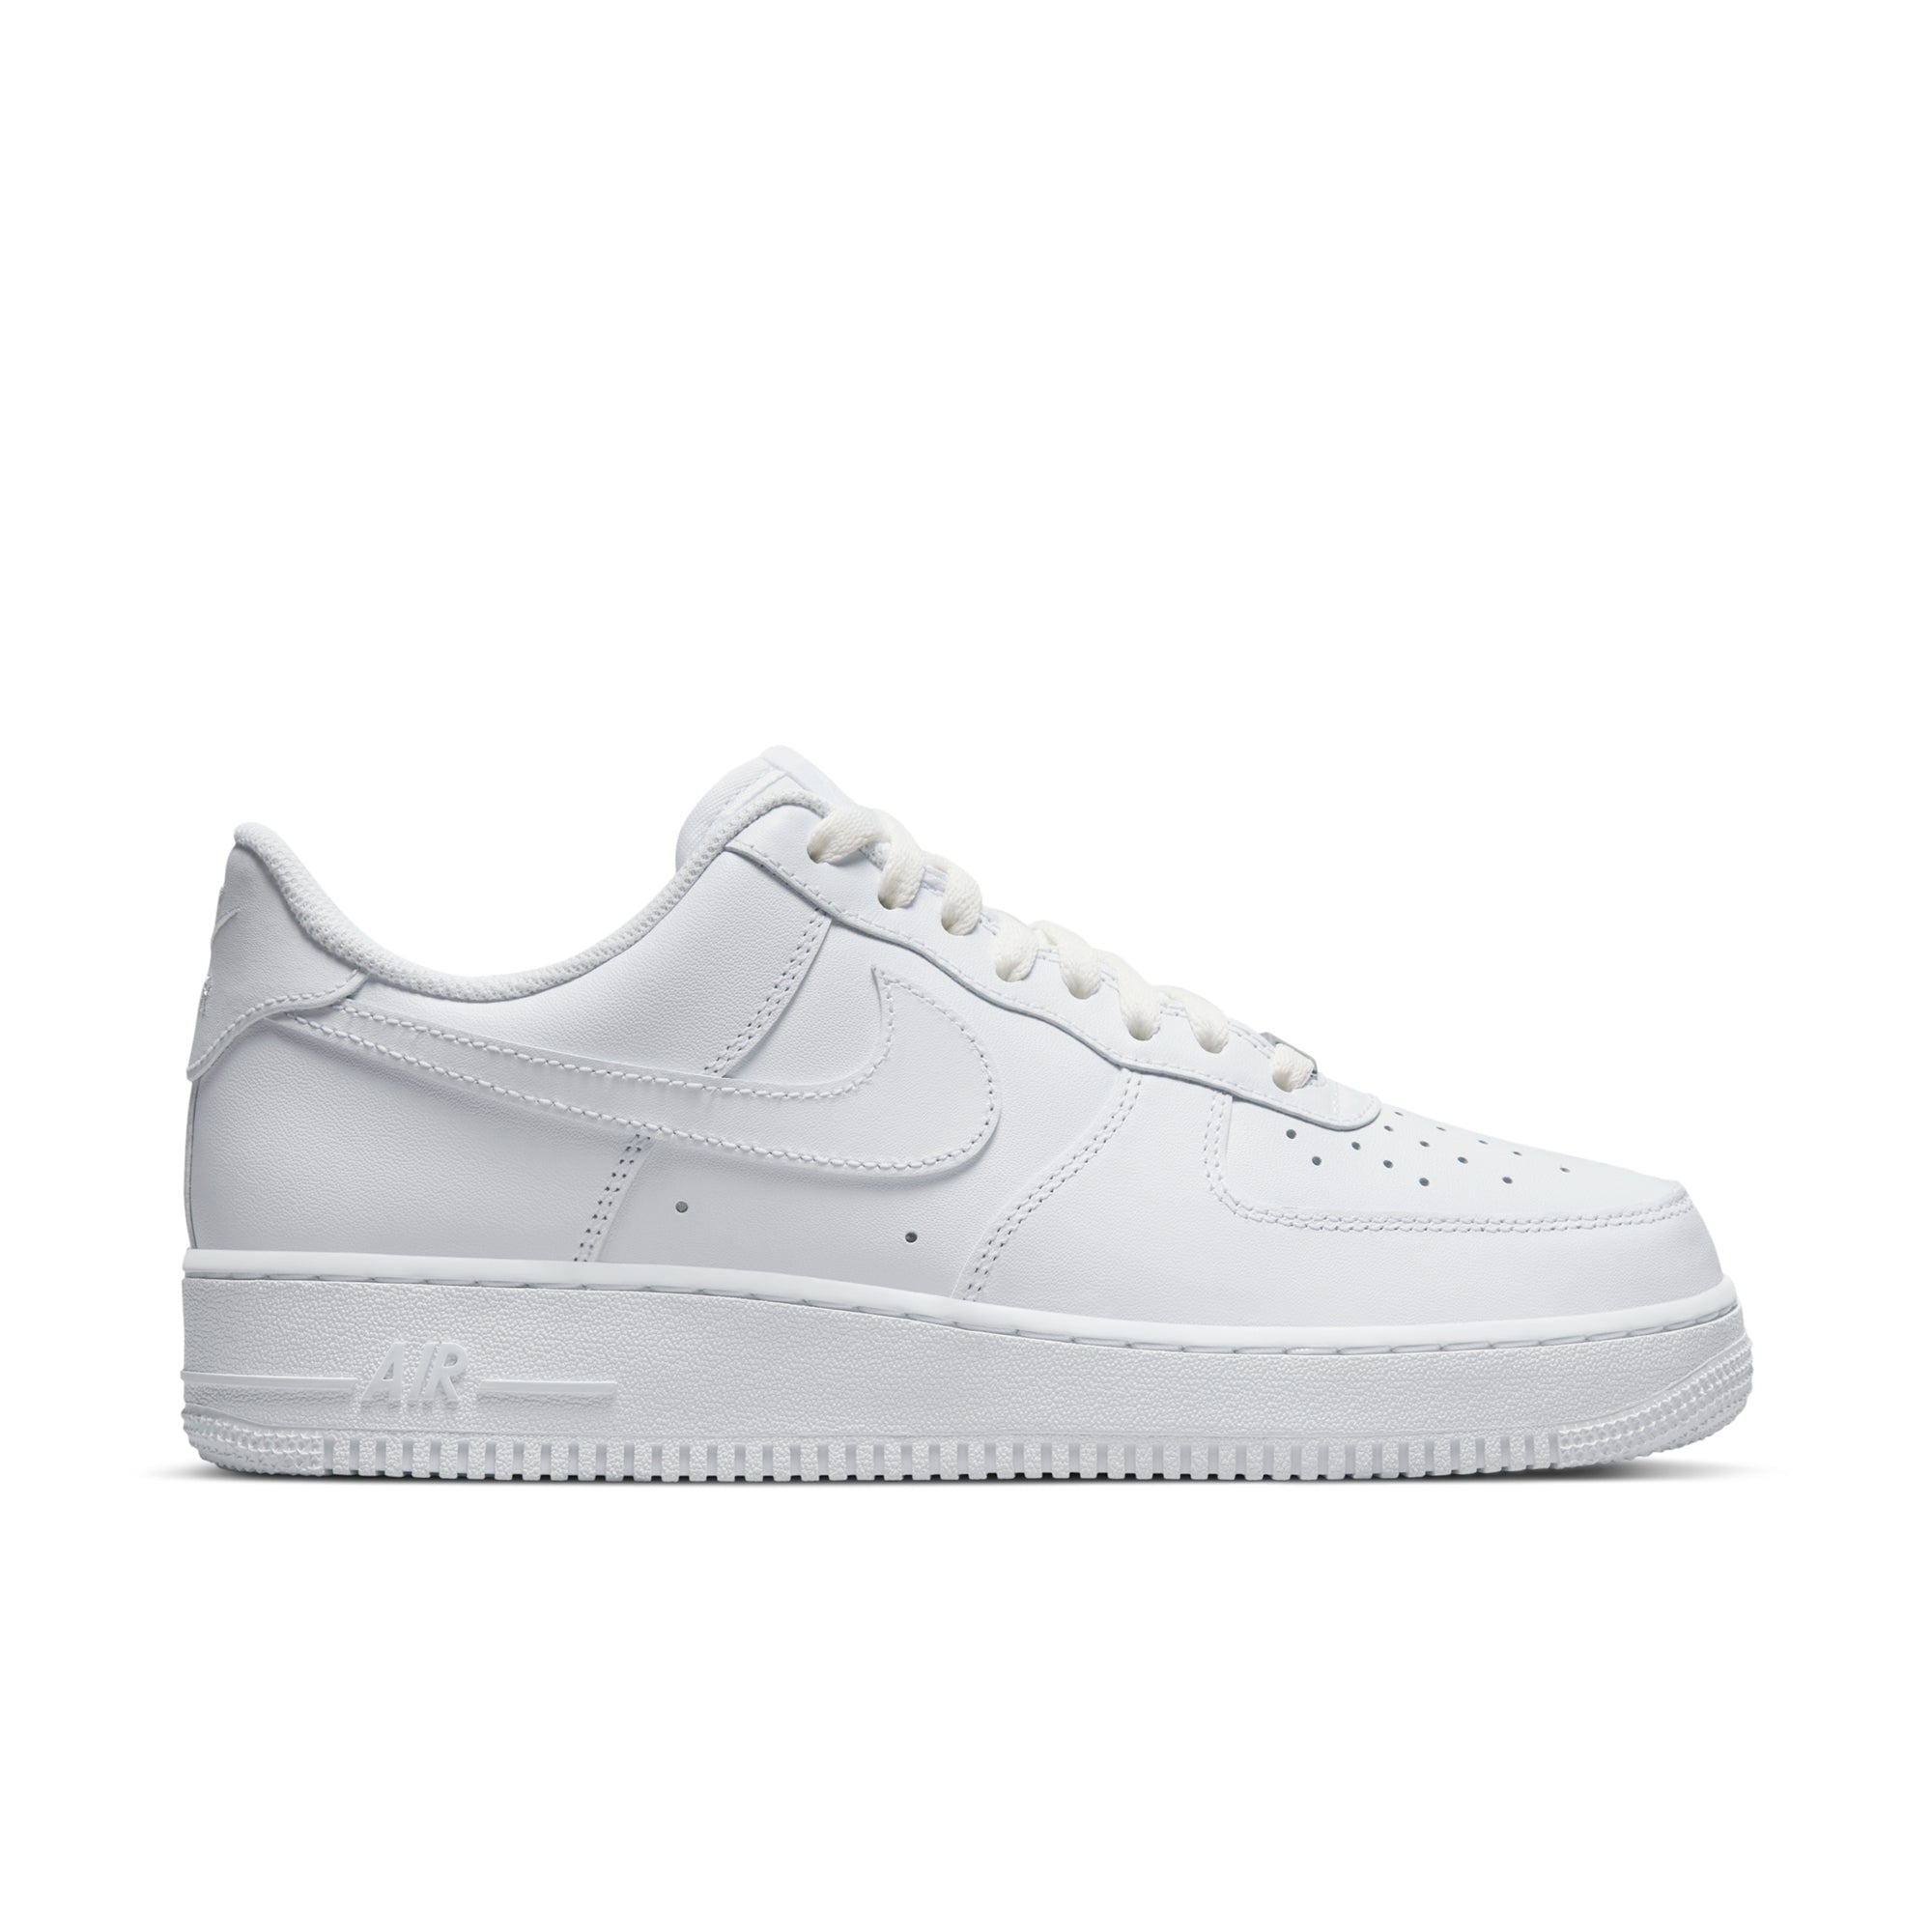 nike air force 1 high 07 an20 Nike Air Force 1 Low '07 White | CW2288-111 42.5 - Livrare express 24 ore